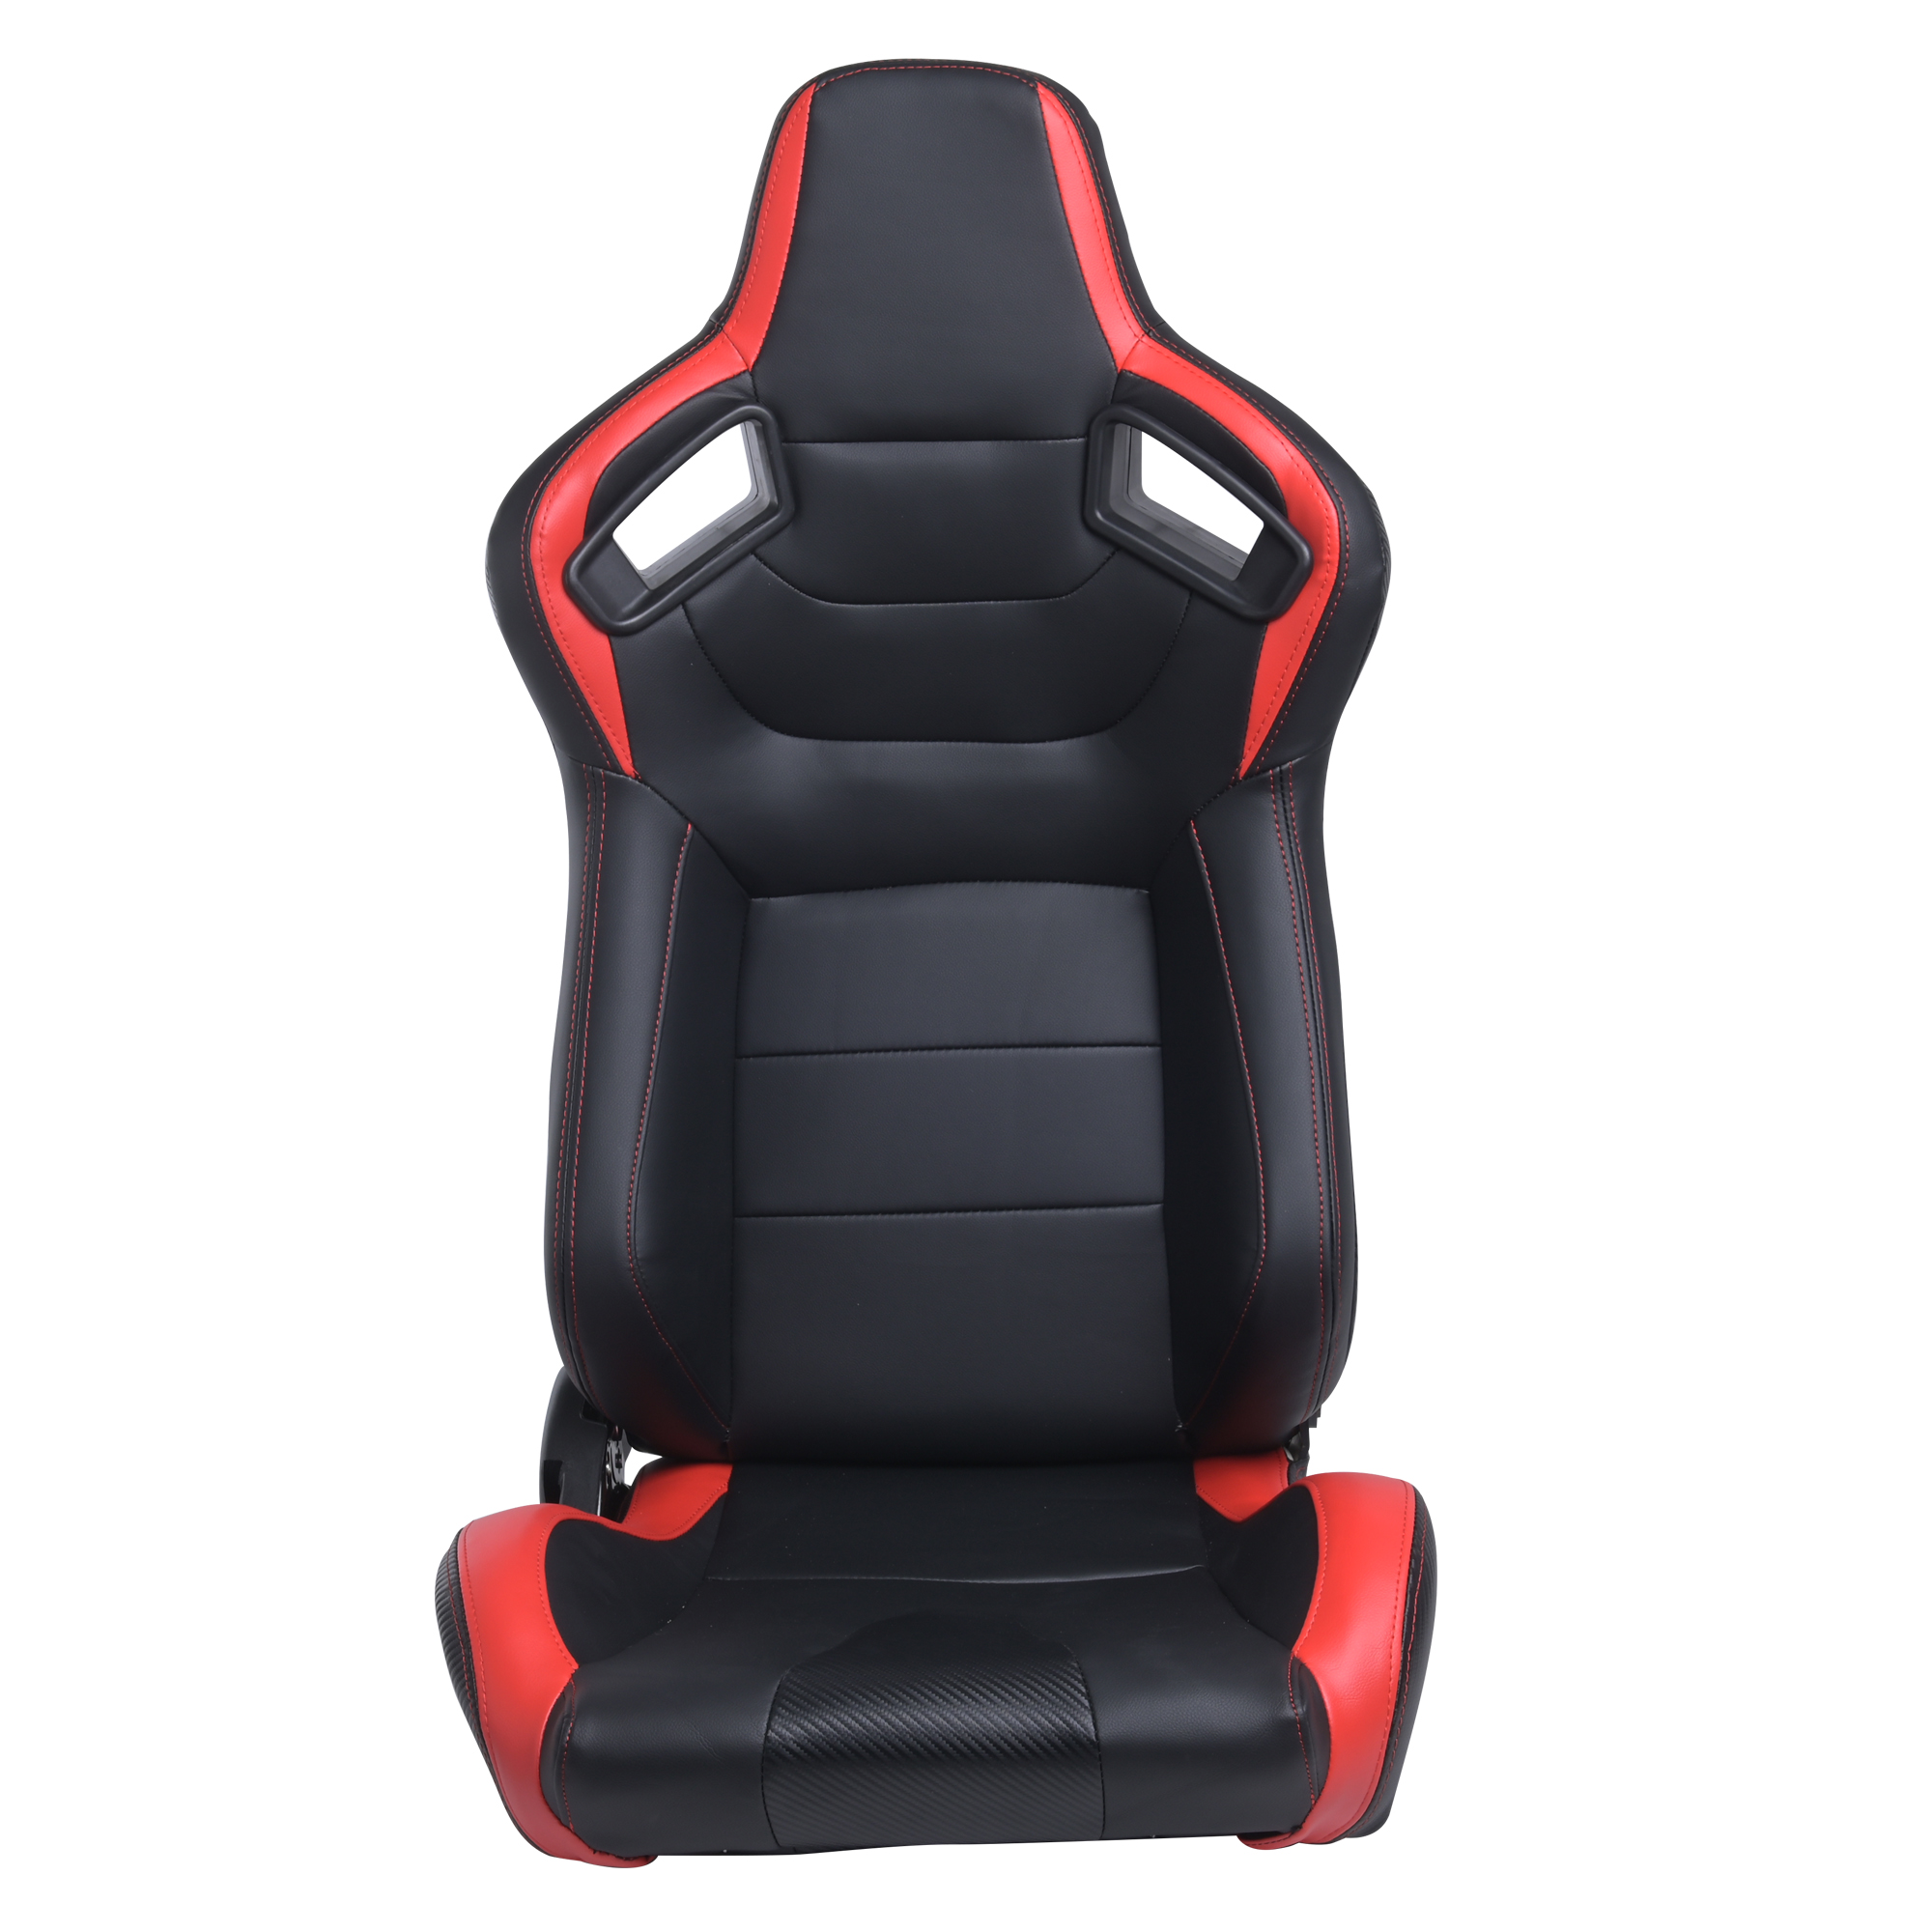 RACING SEAT  BLACK RED  PVC LEATHER WITH DOUBLE SLIDER  2PCS-Boyel Living